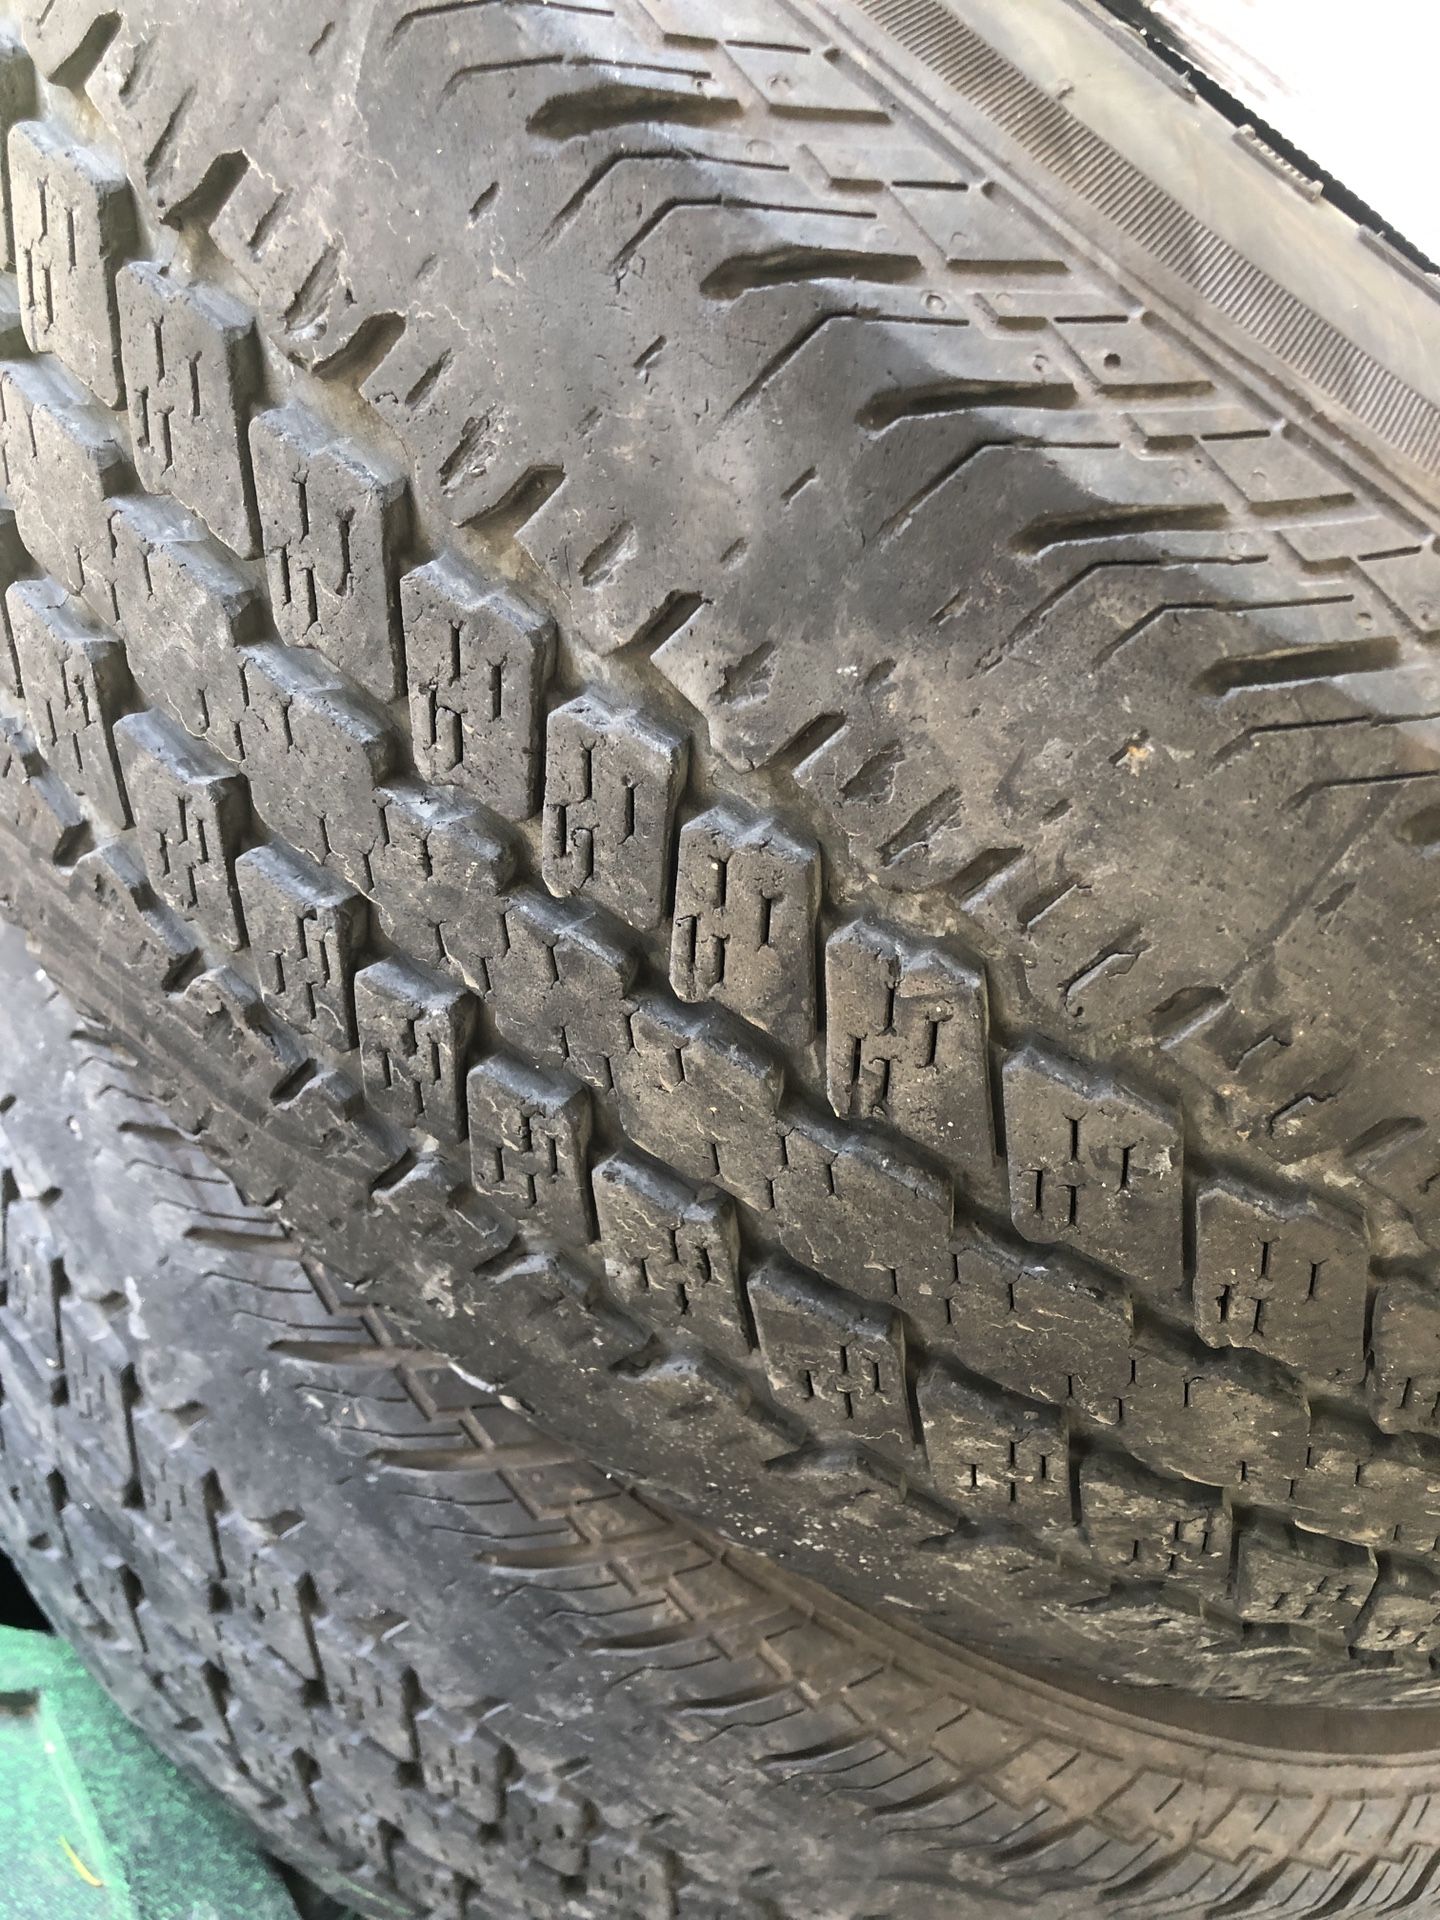 18” tires - just reduced price